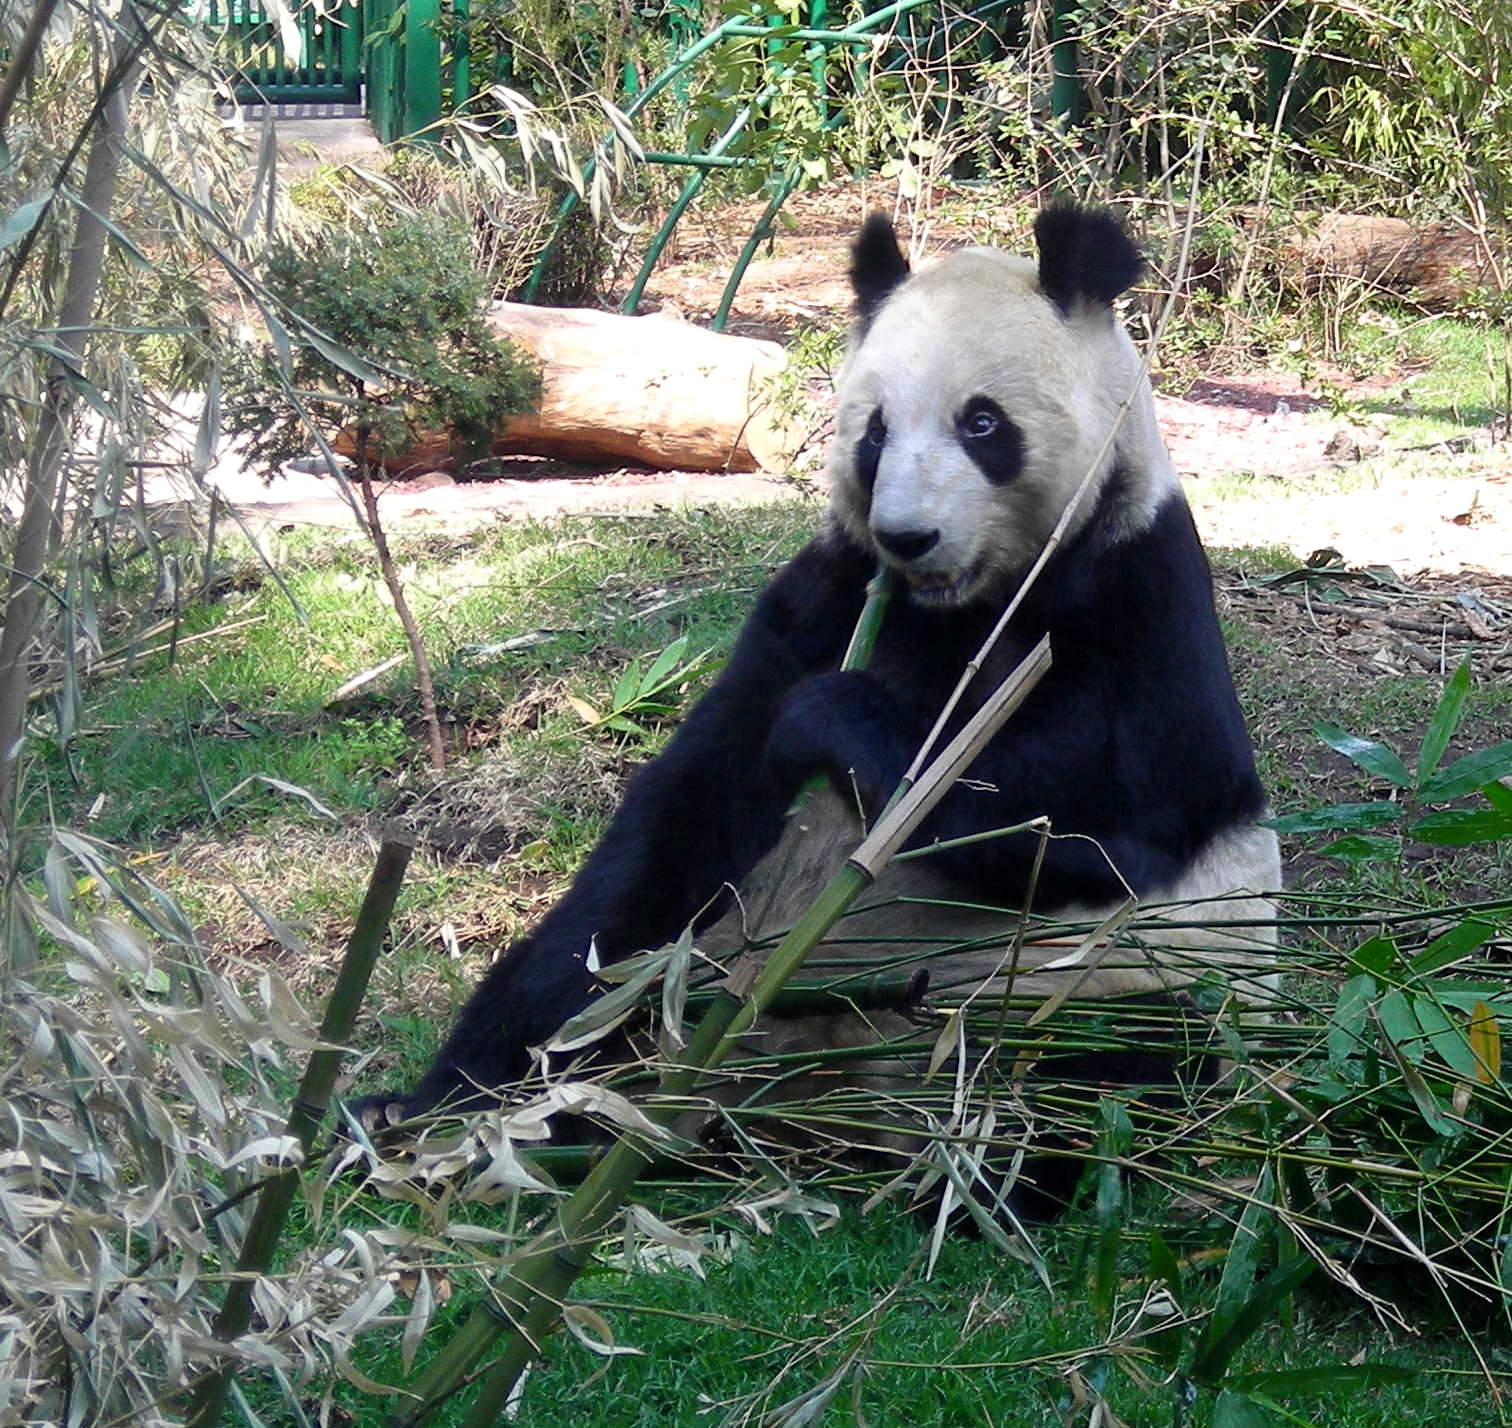 How old is Xin Xin the Panda?